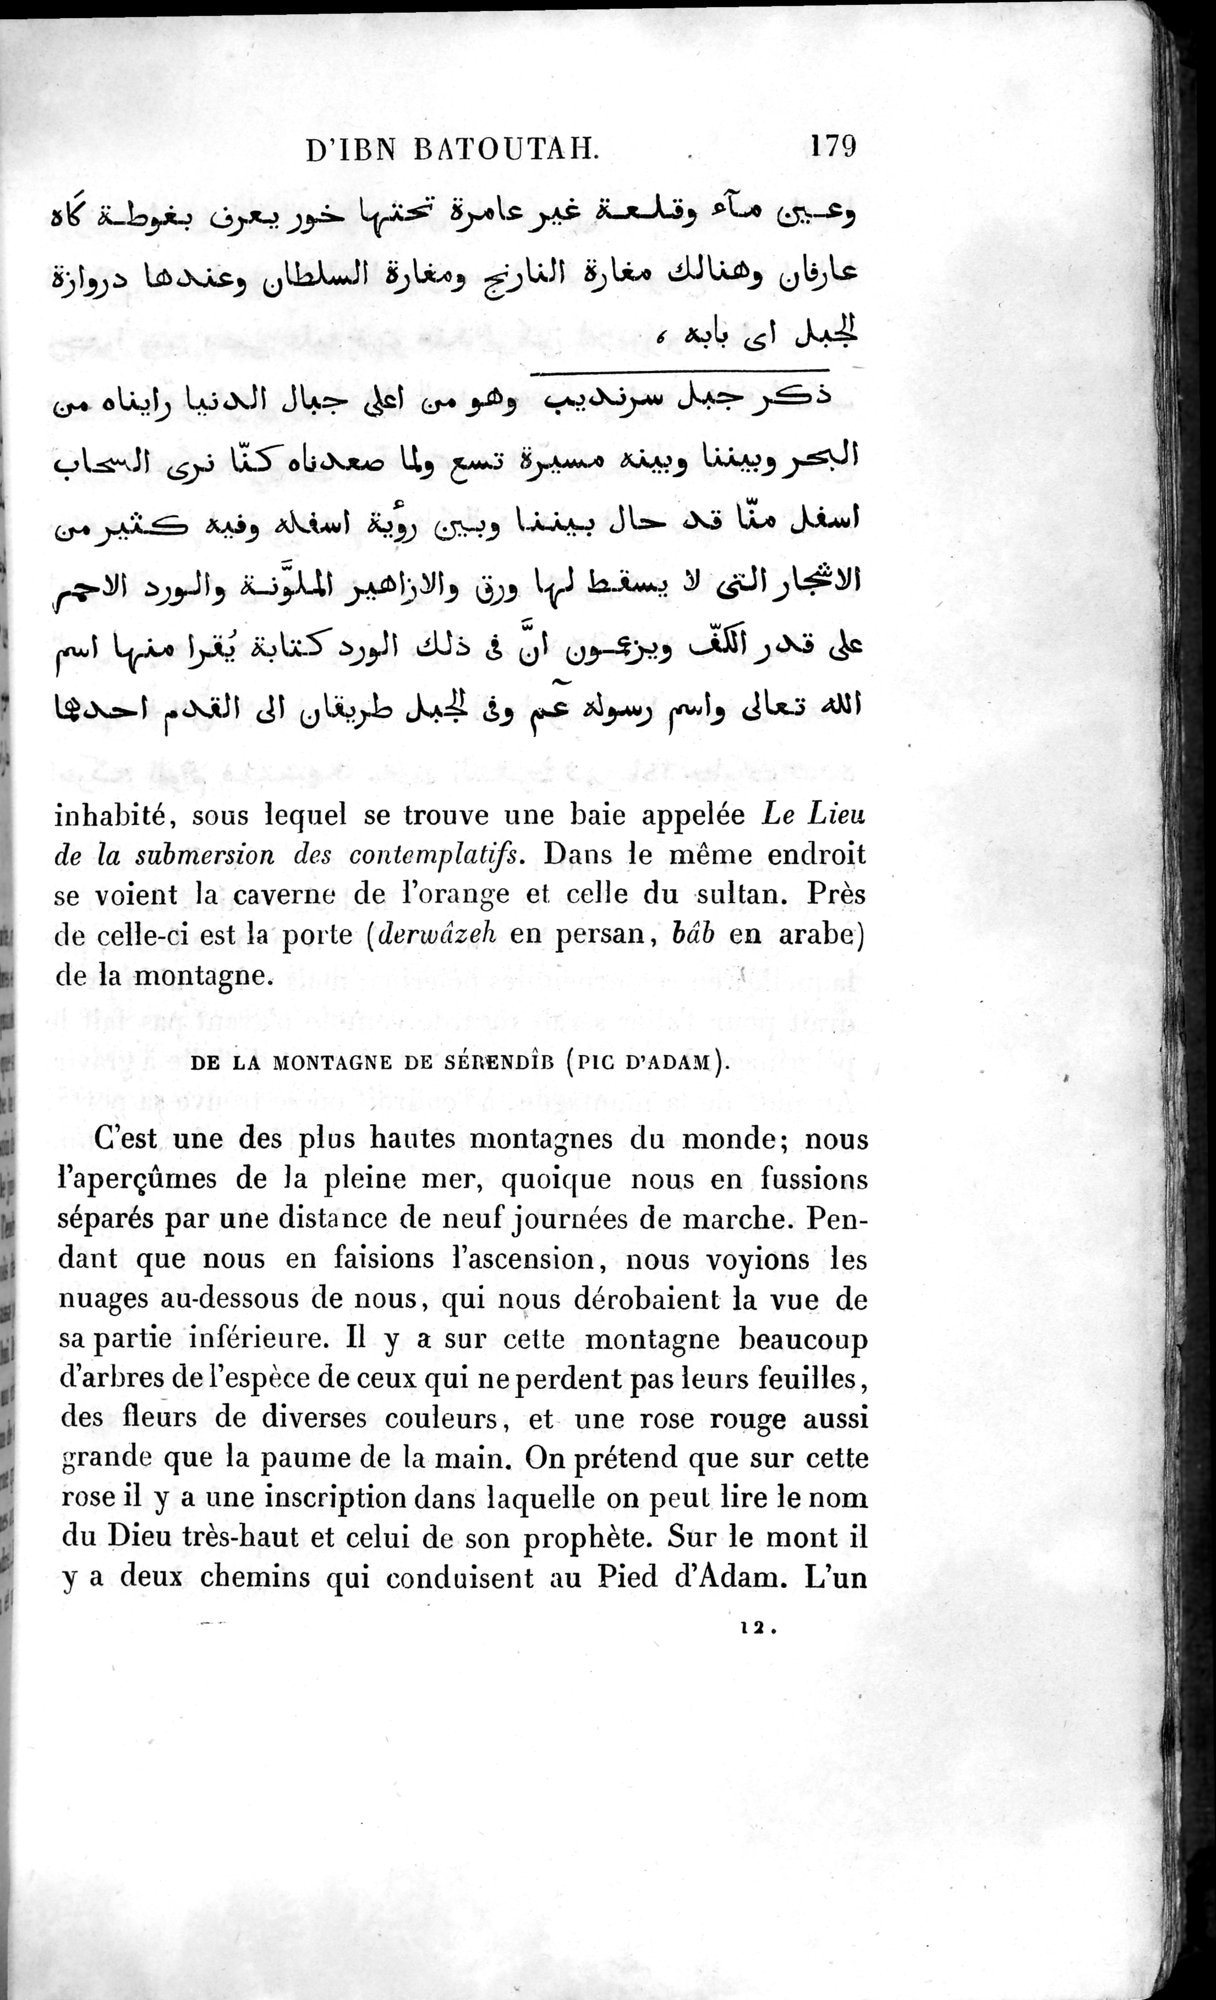 Voyages d'Ibn Batoutah : vol.4 / Page 191 (Grayscale High Resolution Image)